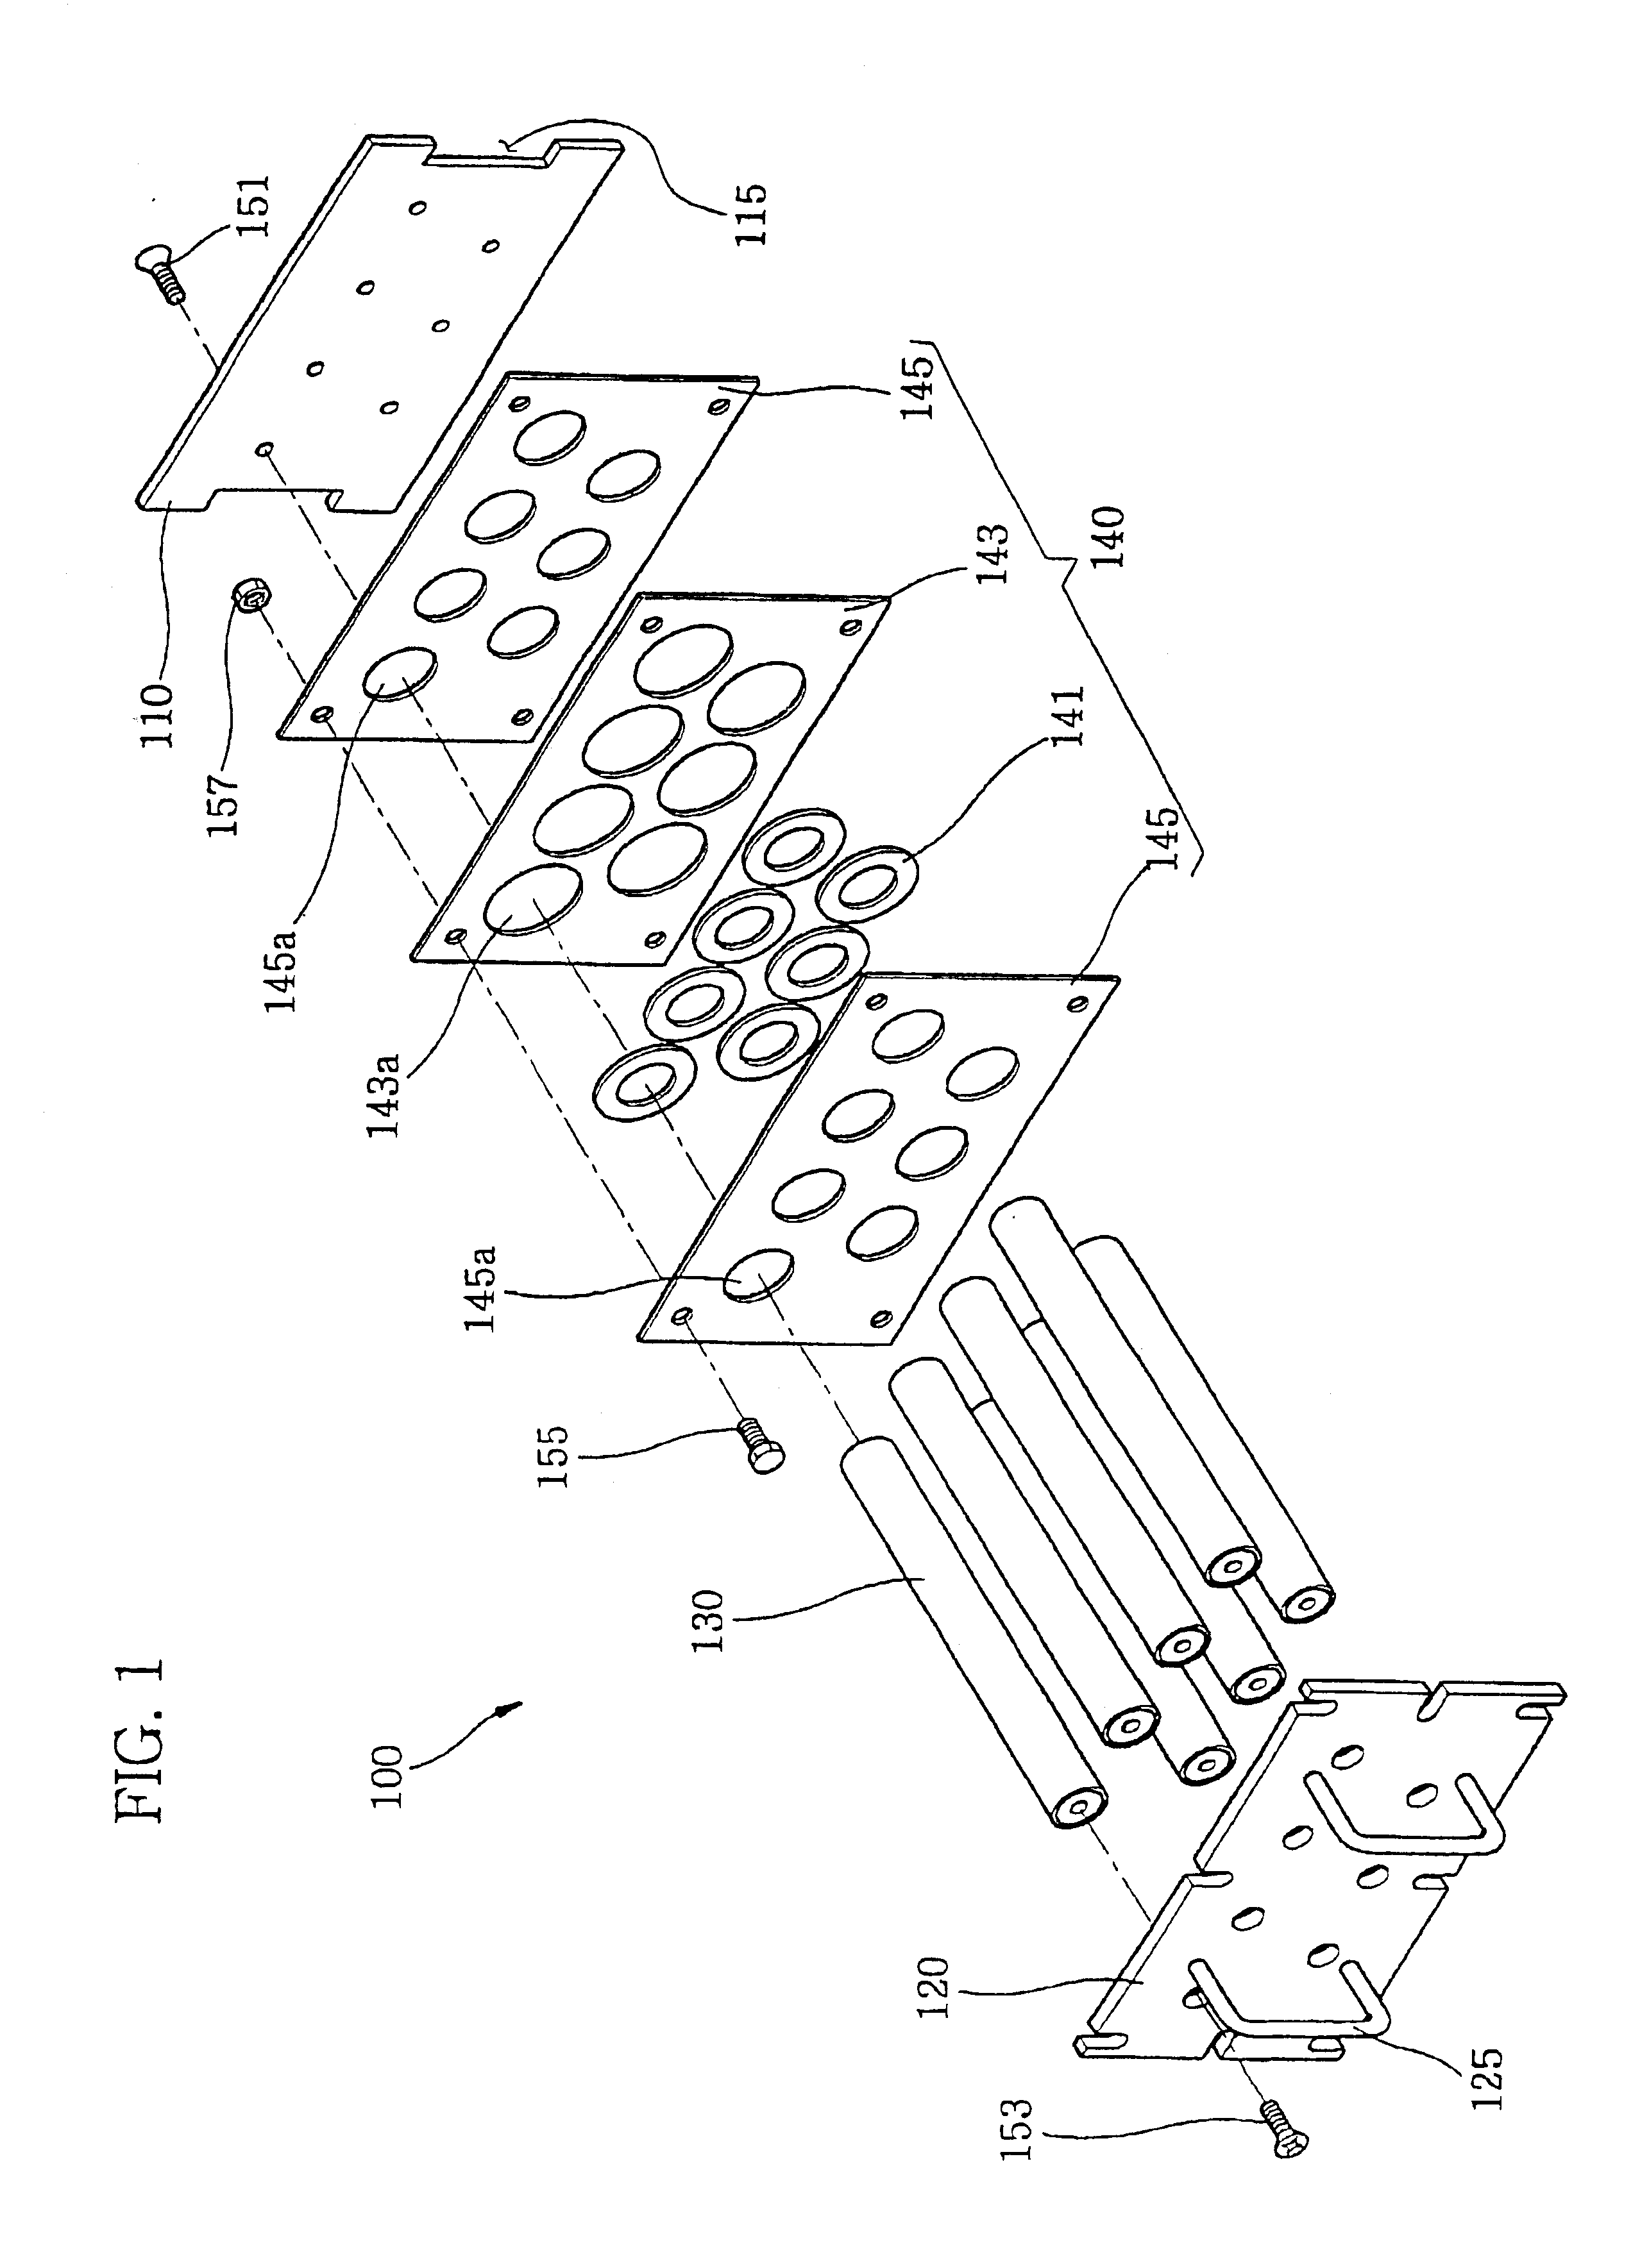 Removal unit for metal alien material removal apparatus